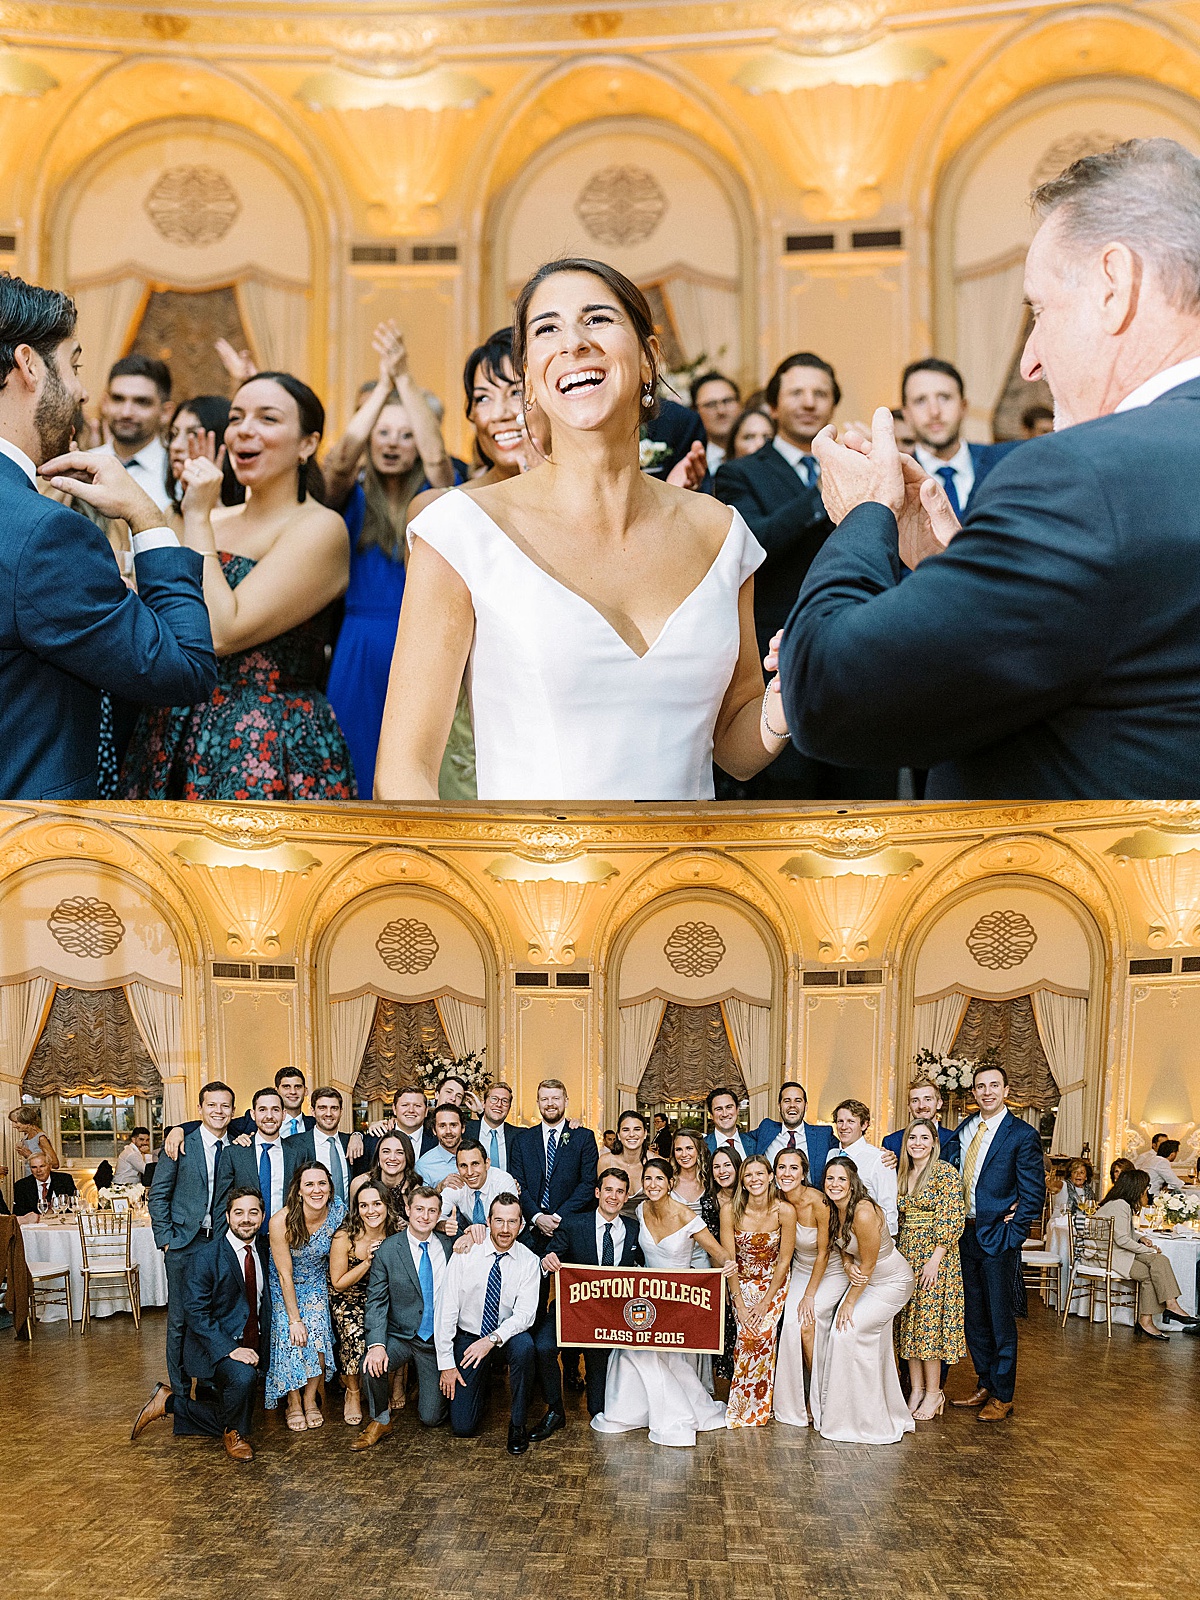 group photo of a people who attended Boston College captured by Boston wedding photographer